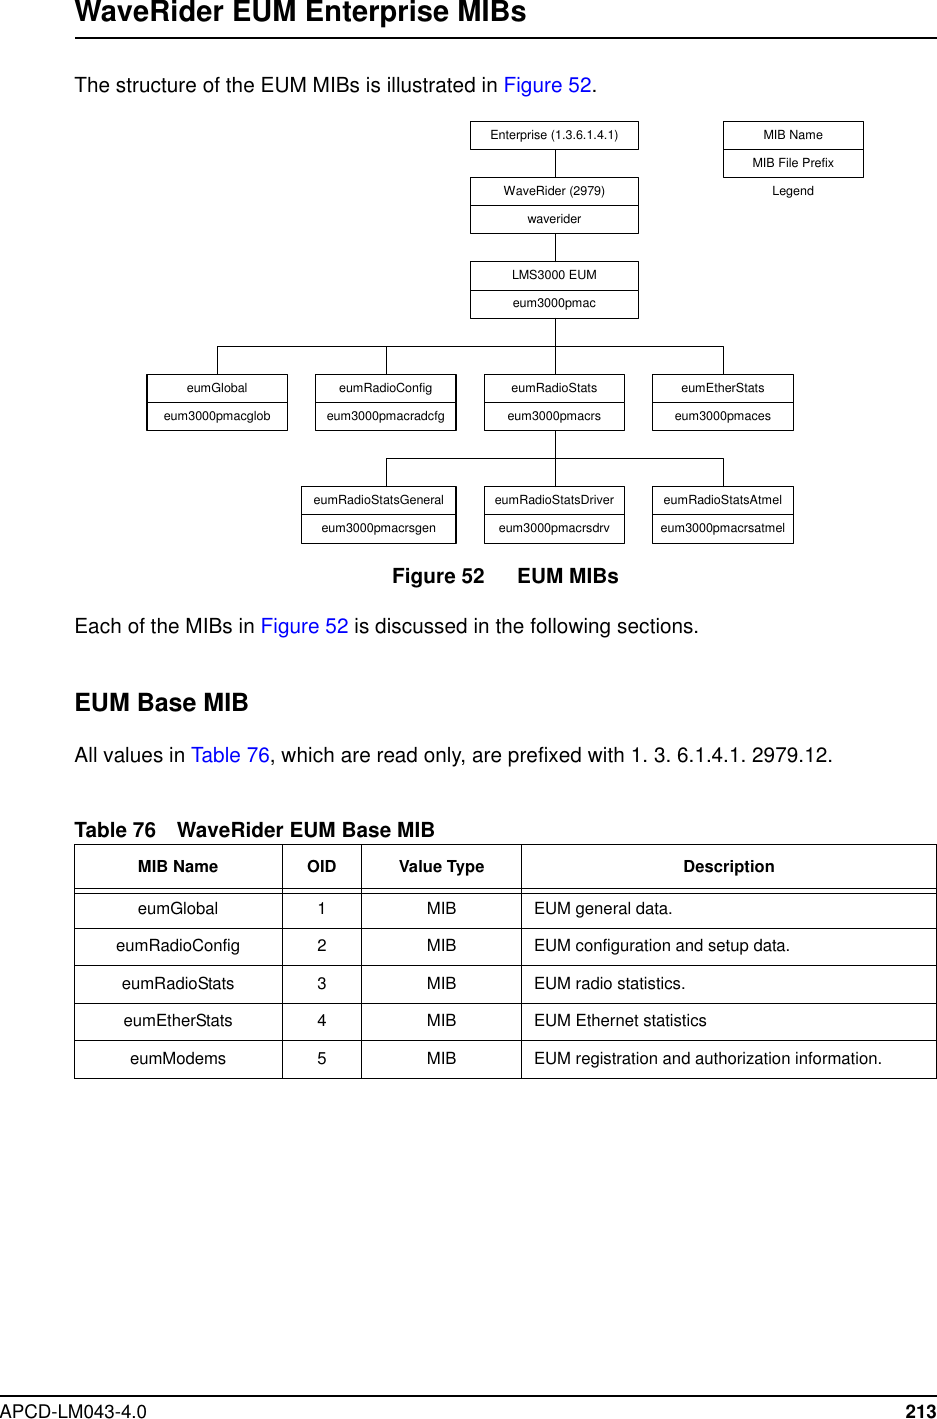 APCD-LM043-4.0 213WaveRider EUM Enterprise MIBsThe structure of the EUM MIBs is illustrated in Figure 52.Figure 52 EUM MIBsEach of the MIBs in Figure 52 is discussed in the following sections.EUM Base MIBAll values in Table 76, which are read only, are prefixed with 1. 3. 6.1.4.1. 2979.12.Table 76 WaveRider EUM Base MIBMIB Name OID Value Type DescriptioneumGlobal 1 MIB EUM general data.eumRadioConfig 2MIB EUM configuration and setup data.eumRadioStats 3MIB EUM radio statistics.eumEtherStats 4MIB EUM Ethernet statisticseumModems 5MIB EUM registration and authorization information.WaveRider (2979)waveridereumGlobaleum3000pmacglobeumRadioConfigeum3000pmacradcfgeumRadioStatseum3000pmacrseumEtherStatseum3000pmaceseumRadioStatsGeneraleum3000pmacrsgeneumRadioStatsDrivereum3000pmacrsdrveumRadioStatsAtmeleum3000pmacrsatmelEnterprise (1.3.6.1.4.1)LMS3000 EUMeum3000pmacMIB NameMIB File PrefixLegend